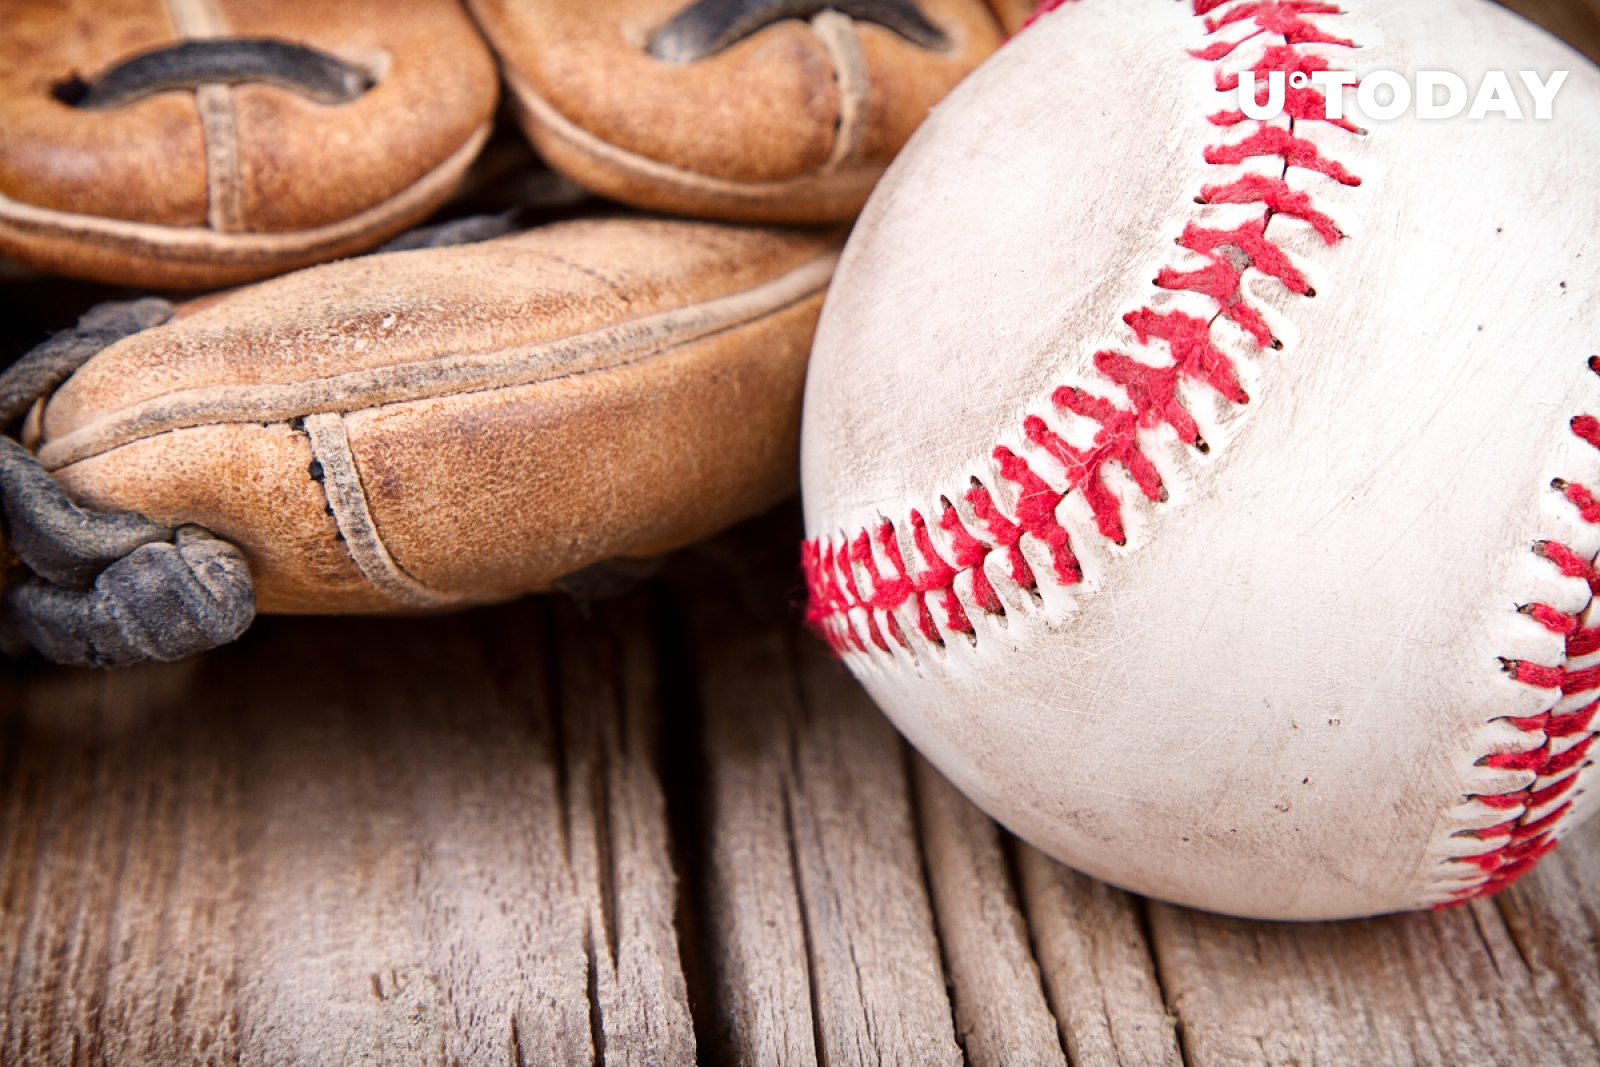 MLB makes NFT play with Michael Rubin-backed digital collectibles startup -  SportsPro